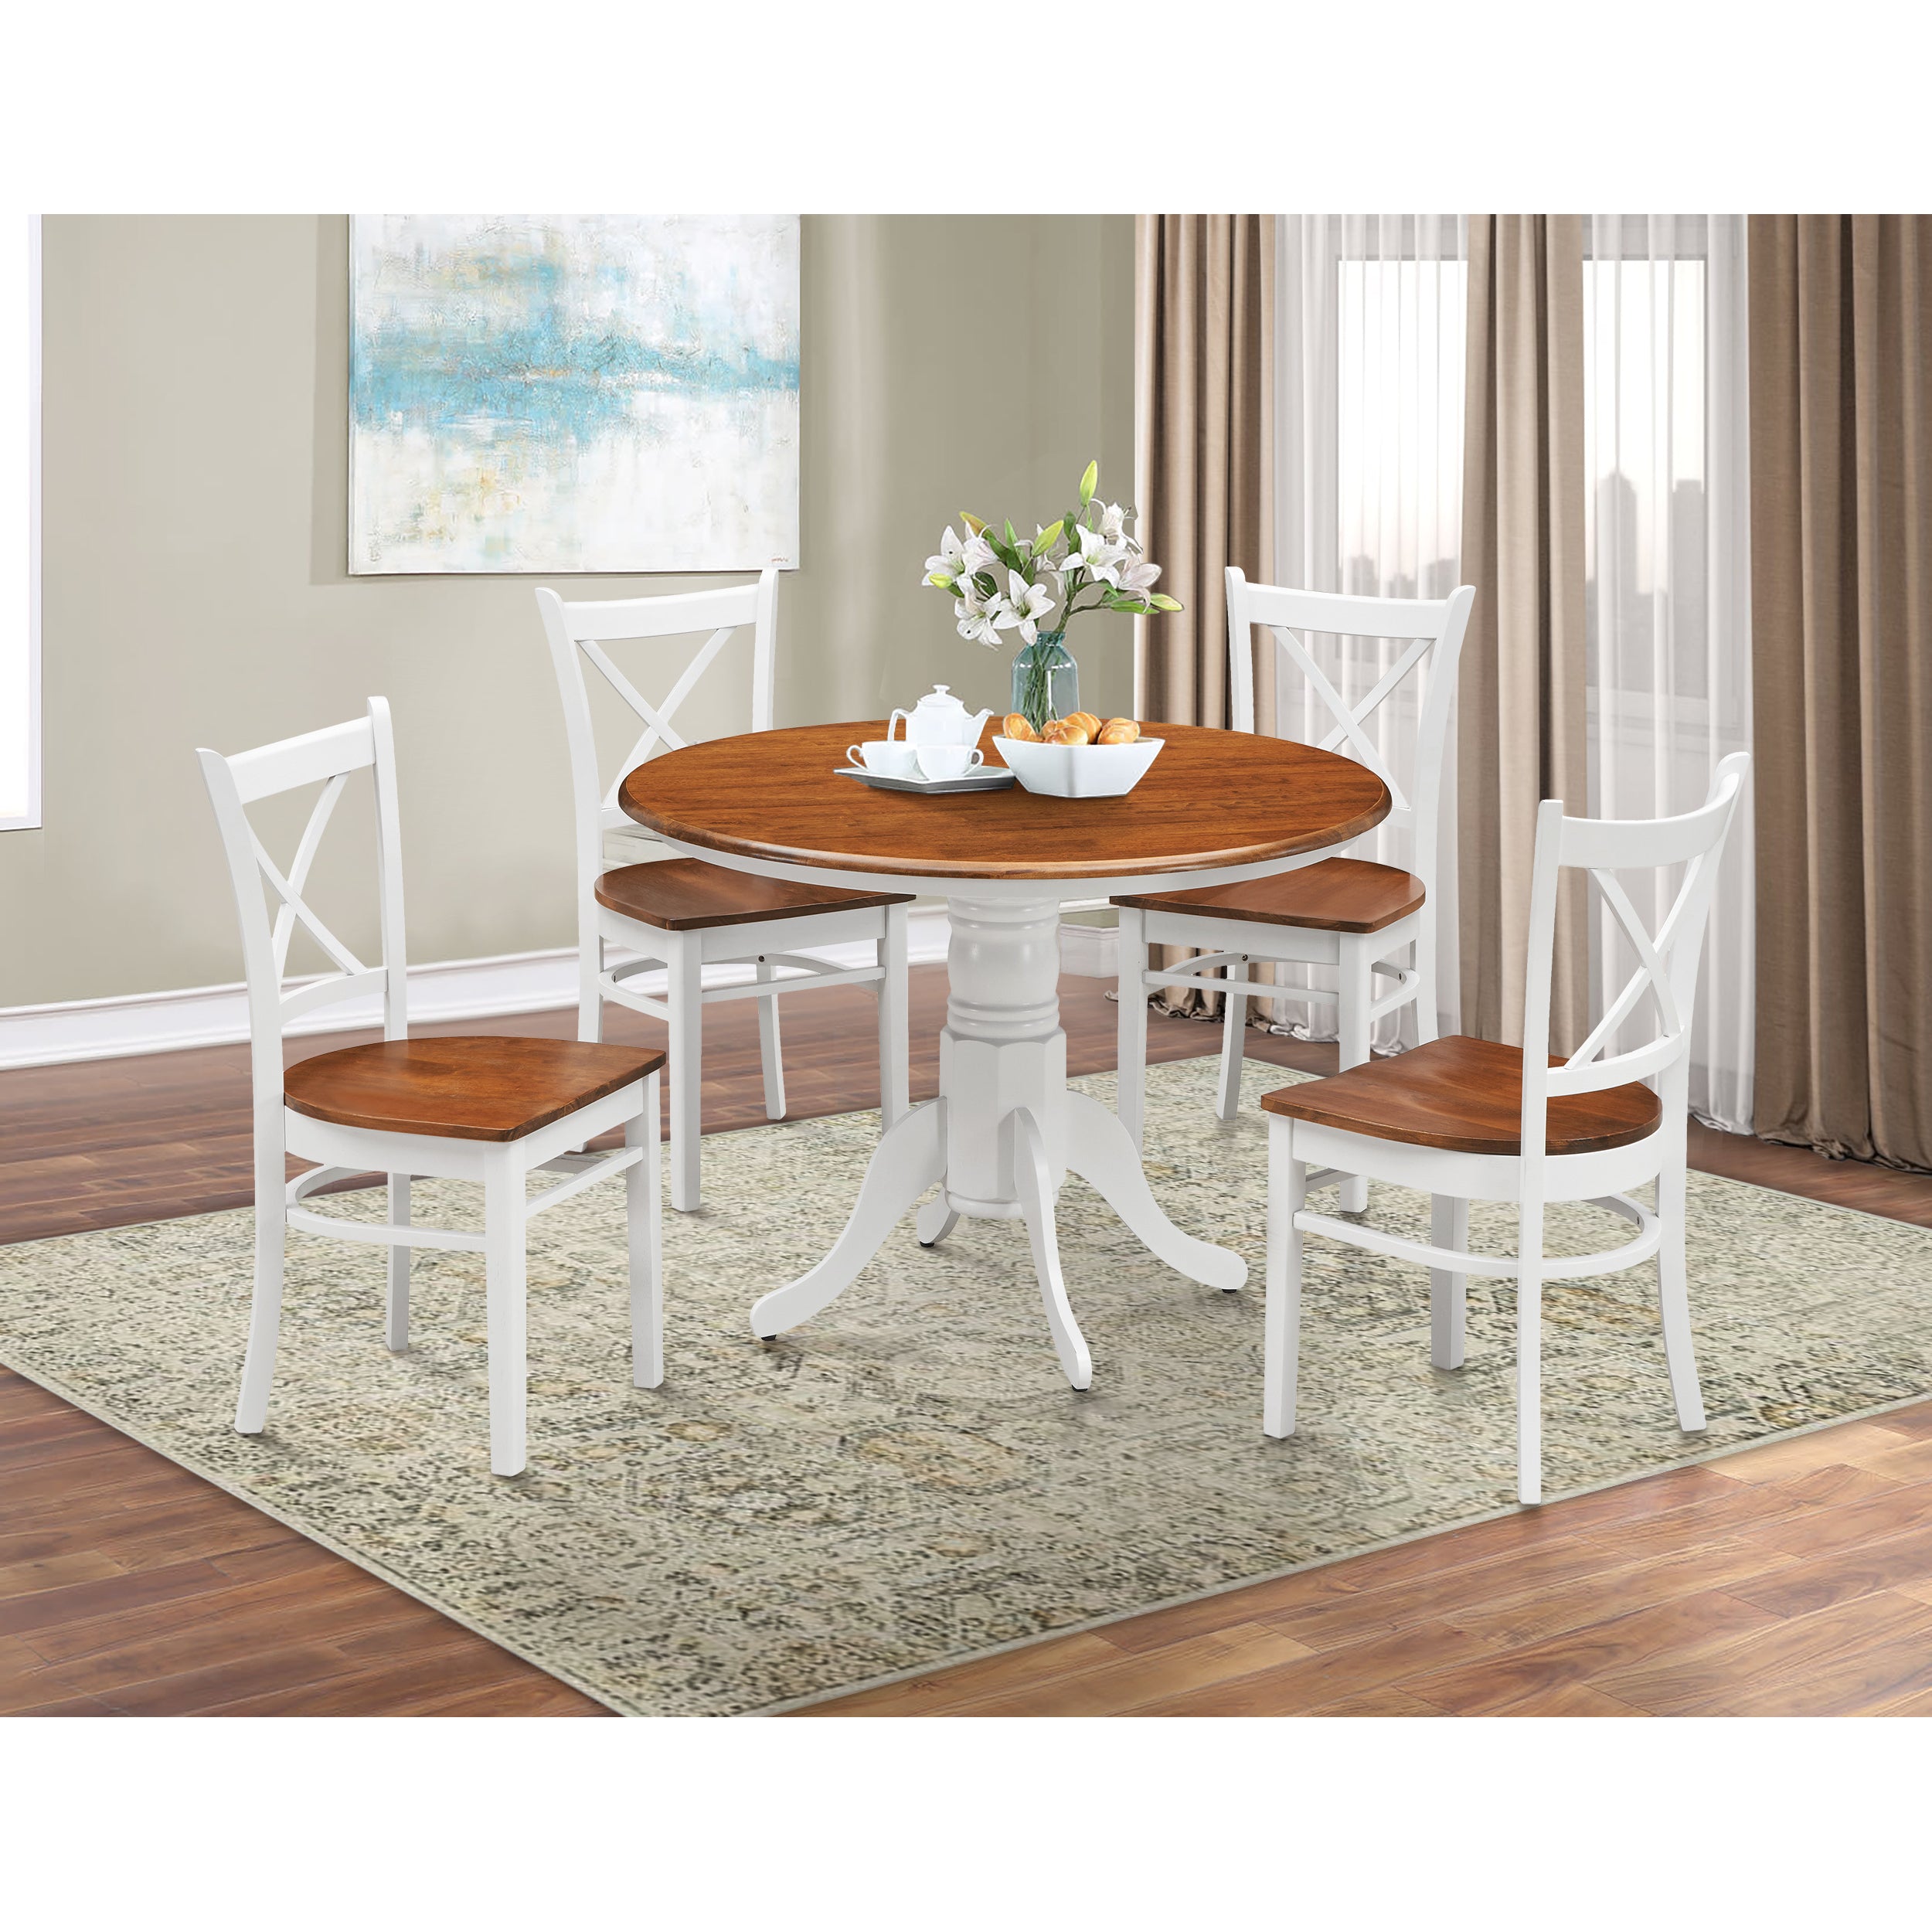 Lupin Dining Chair Set of 4 Crossback Solid Rubber Wood Furniture - White Oak Deals499